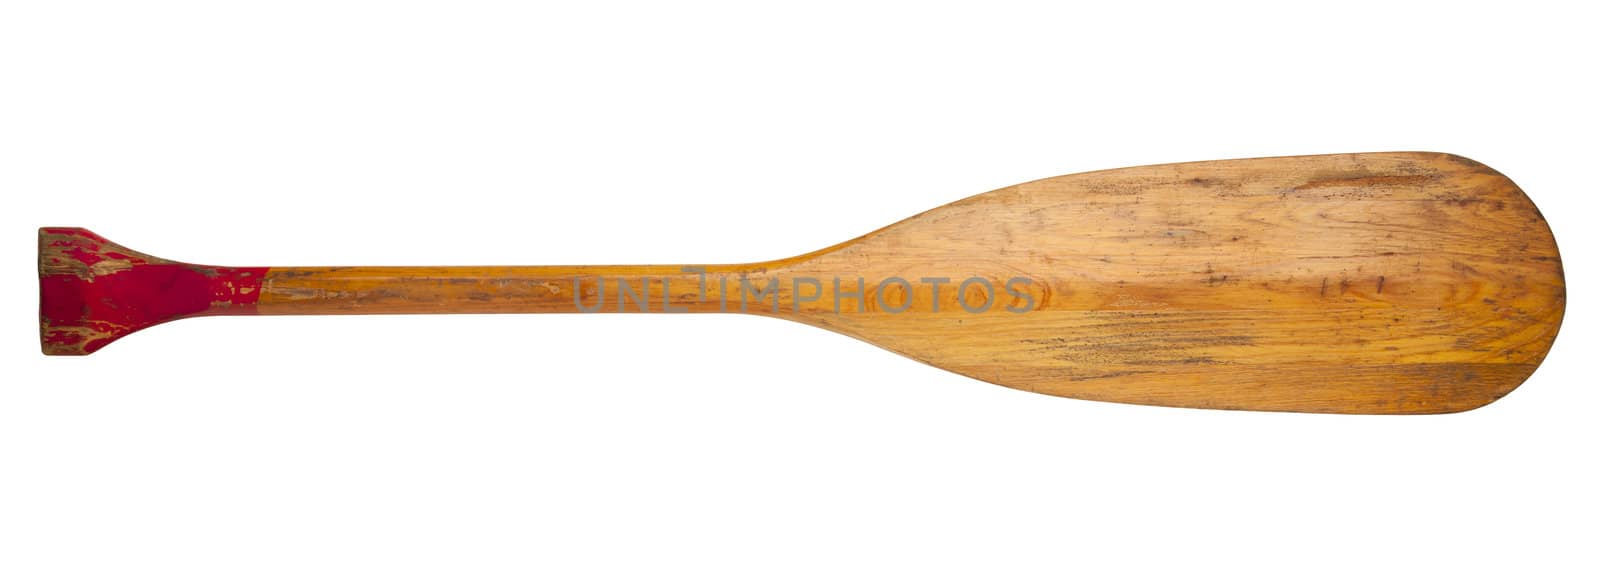 old wooden canoe paddle with a red grip, isolated on white with a clipping path